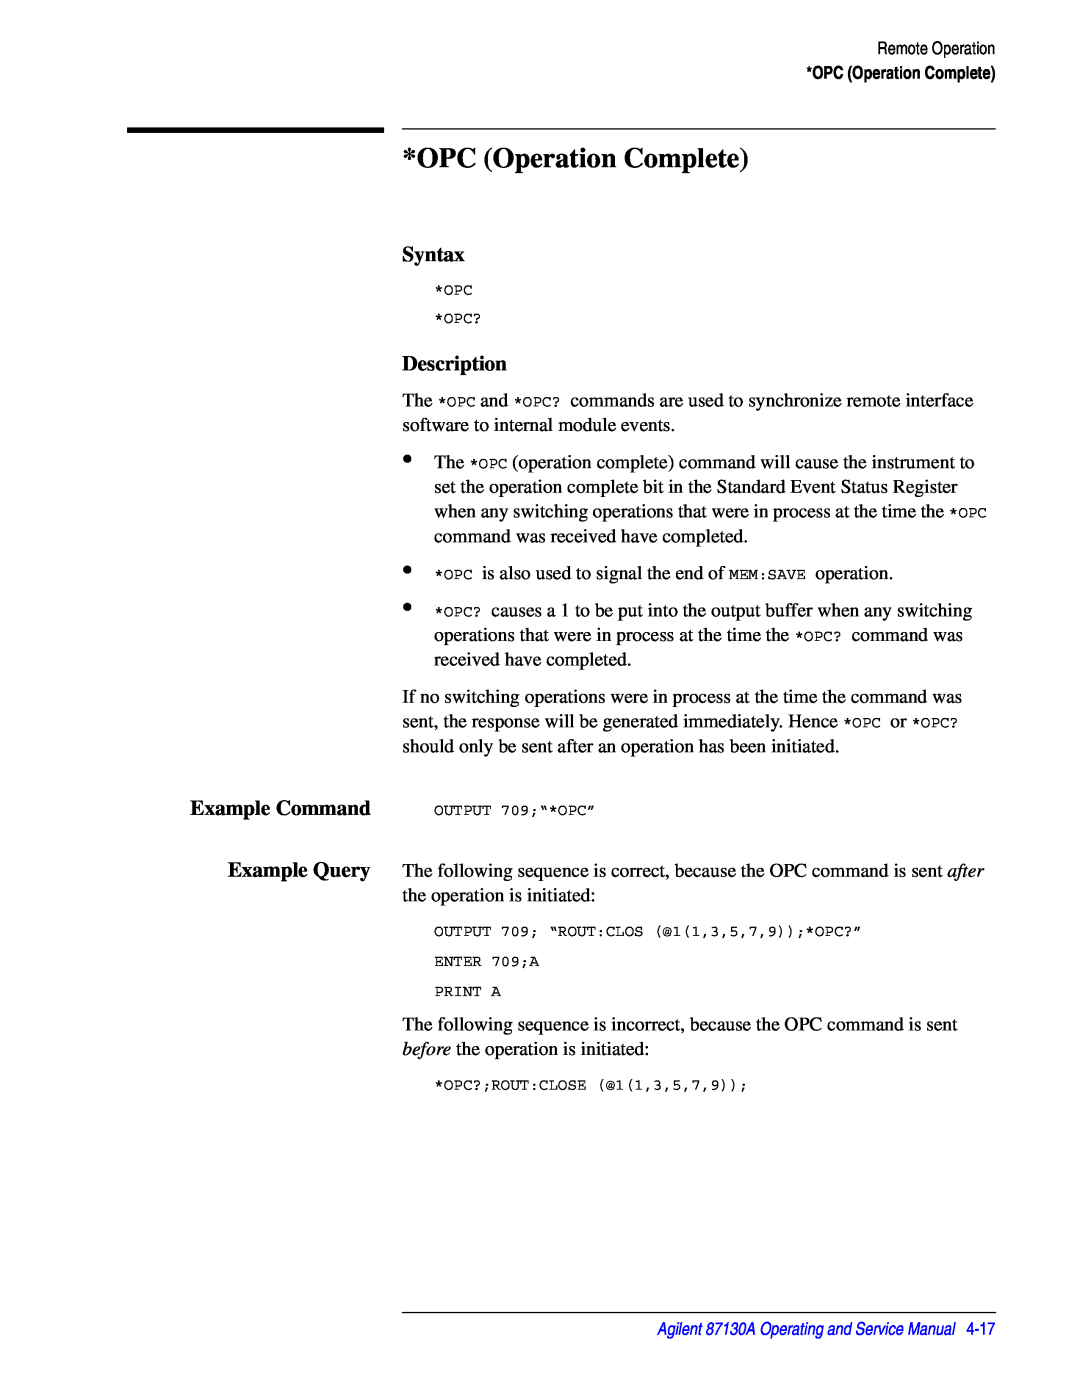 Agilent Technologies 87130A manual OPC Operation Complete, Syntax, Description, Example Command 